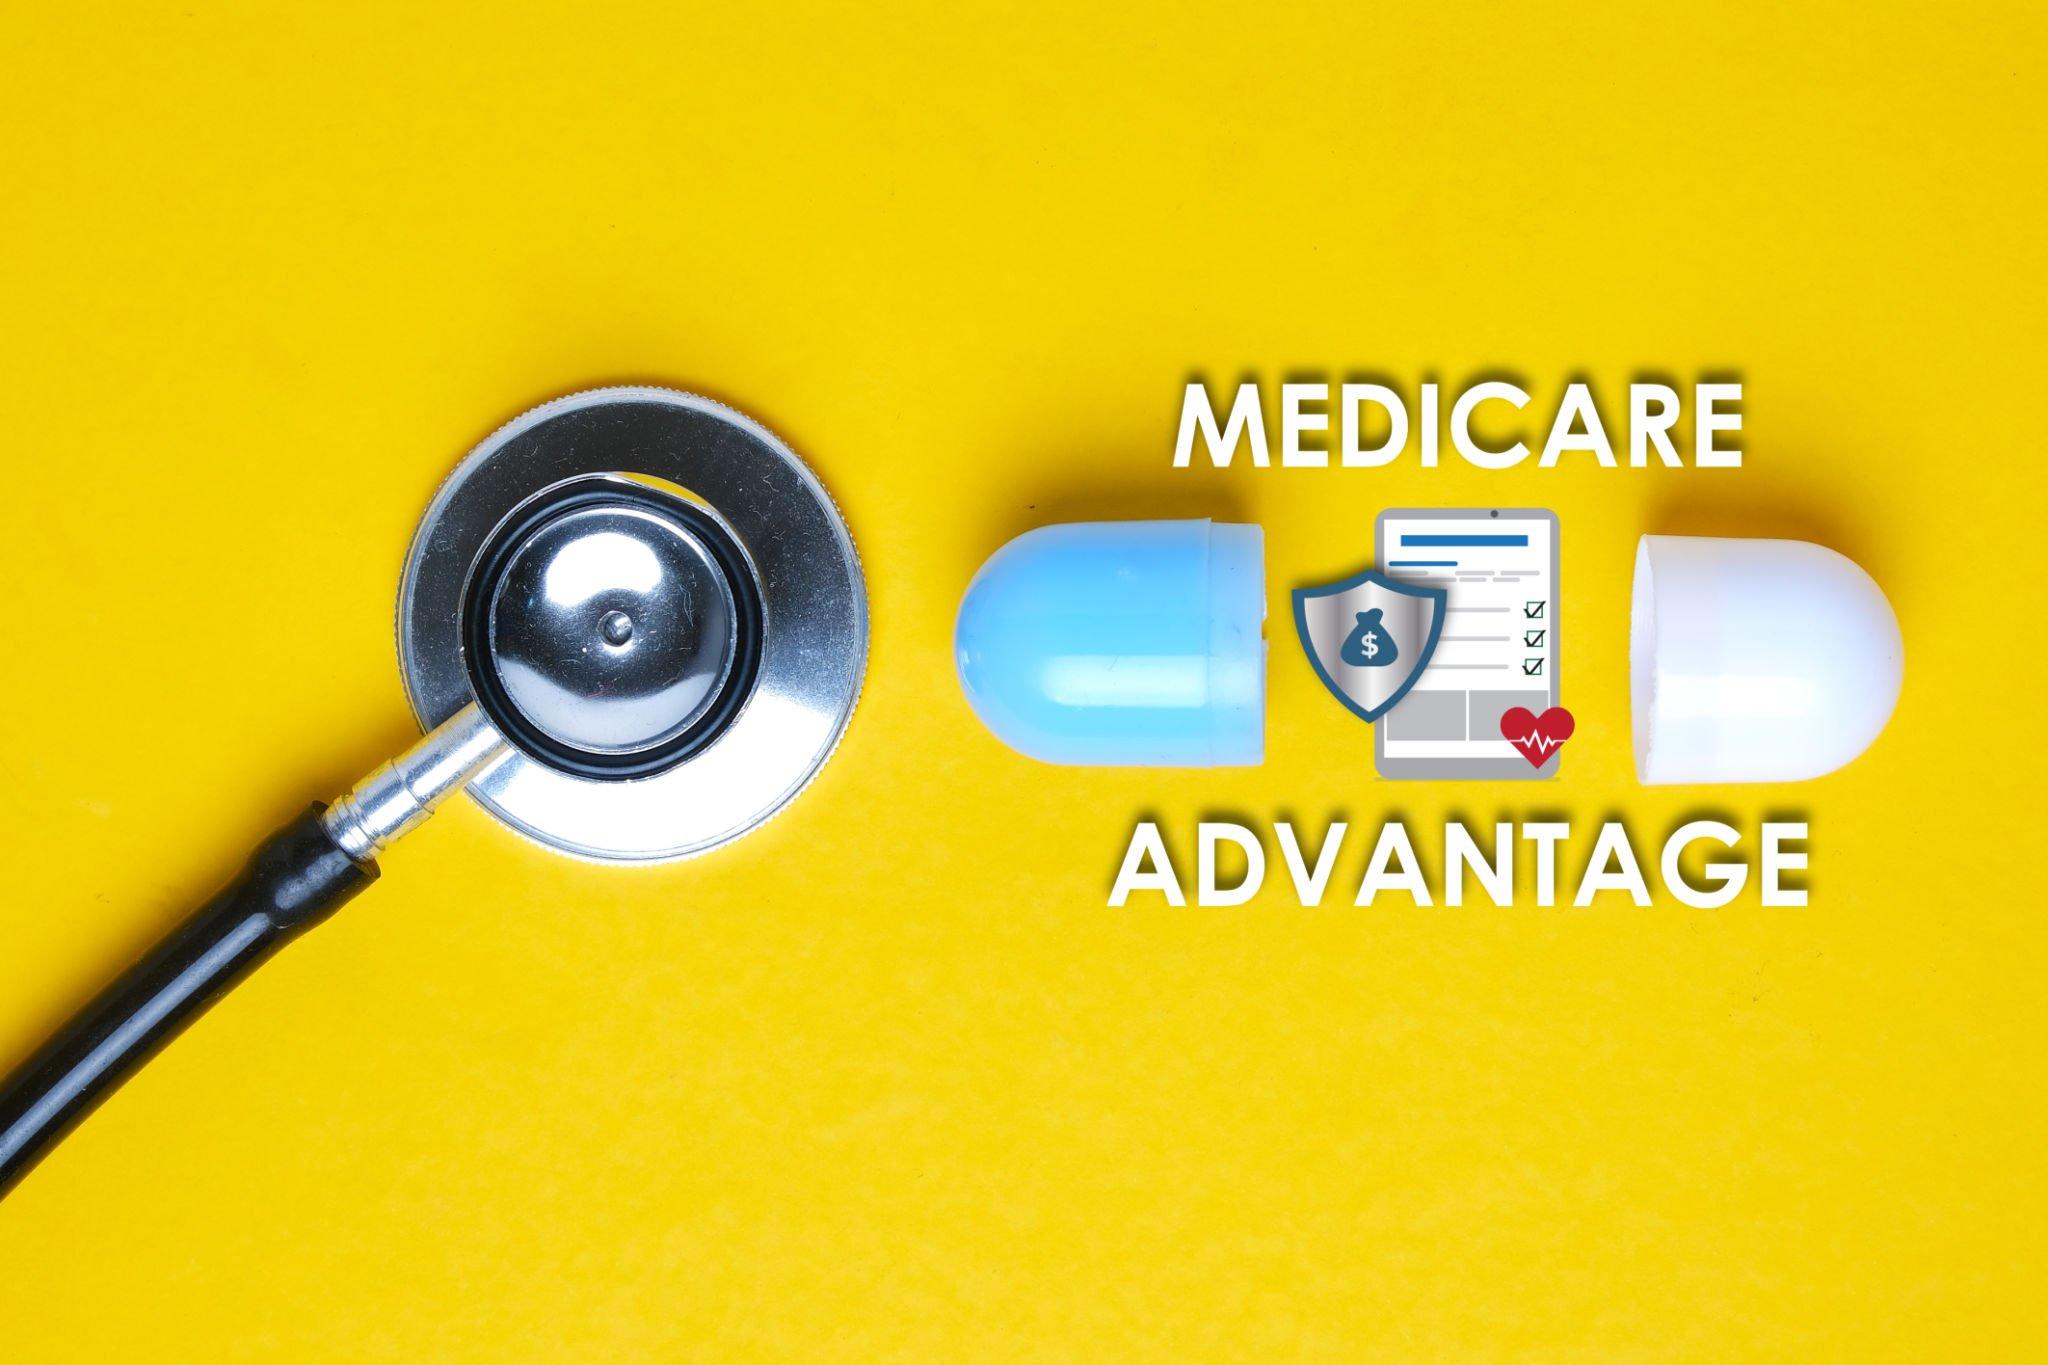 all-you-need-to-know-about-aarp-medicare-advantage-smartblog